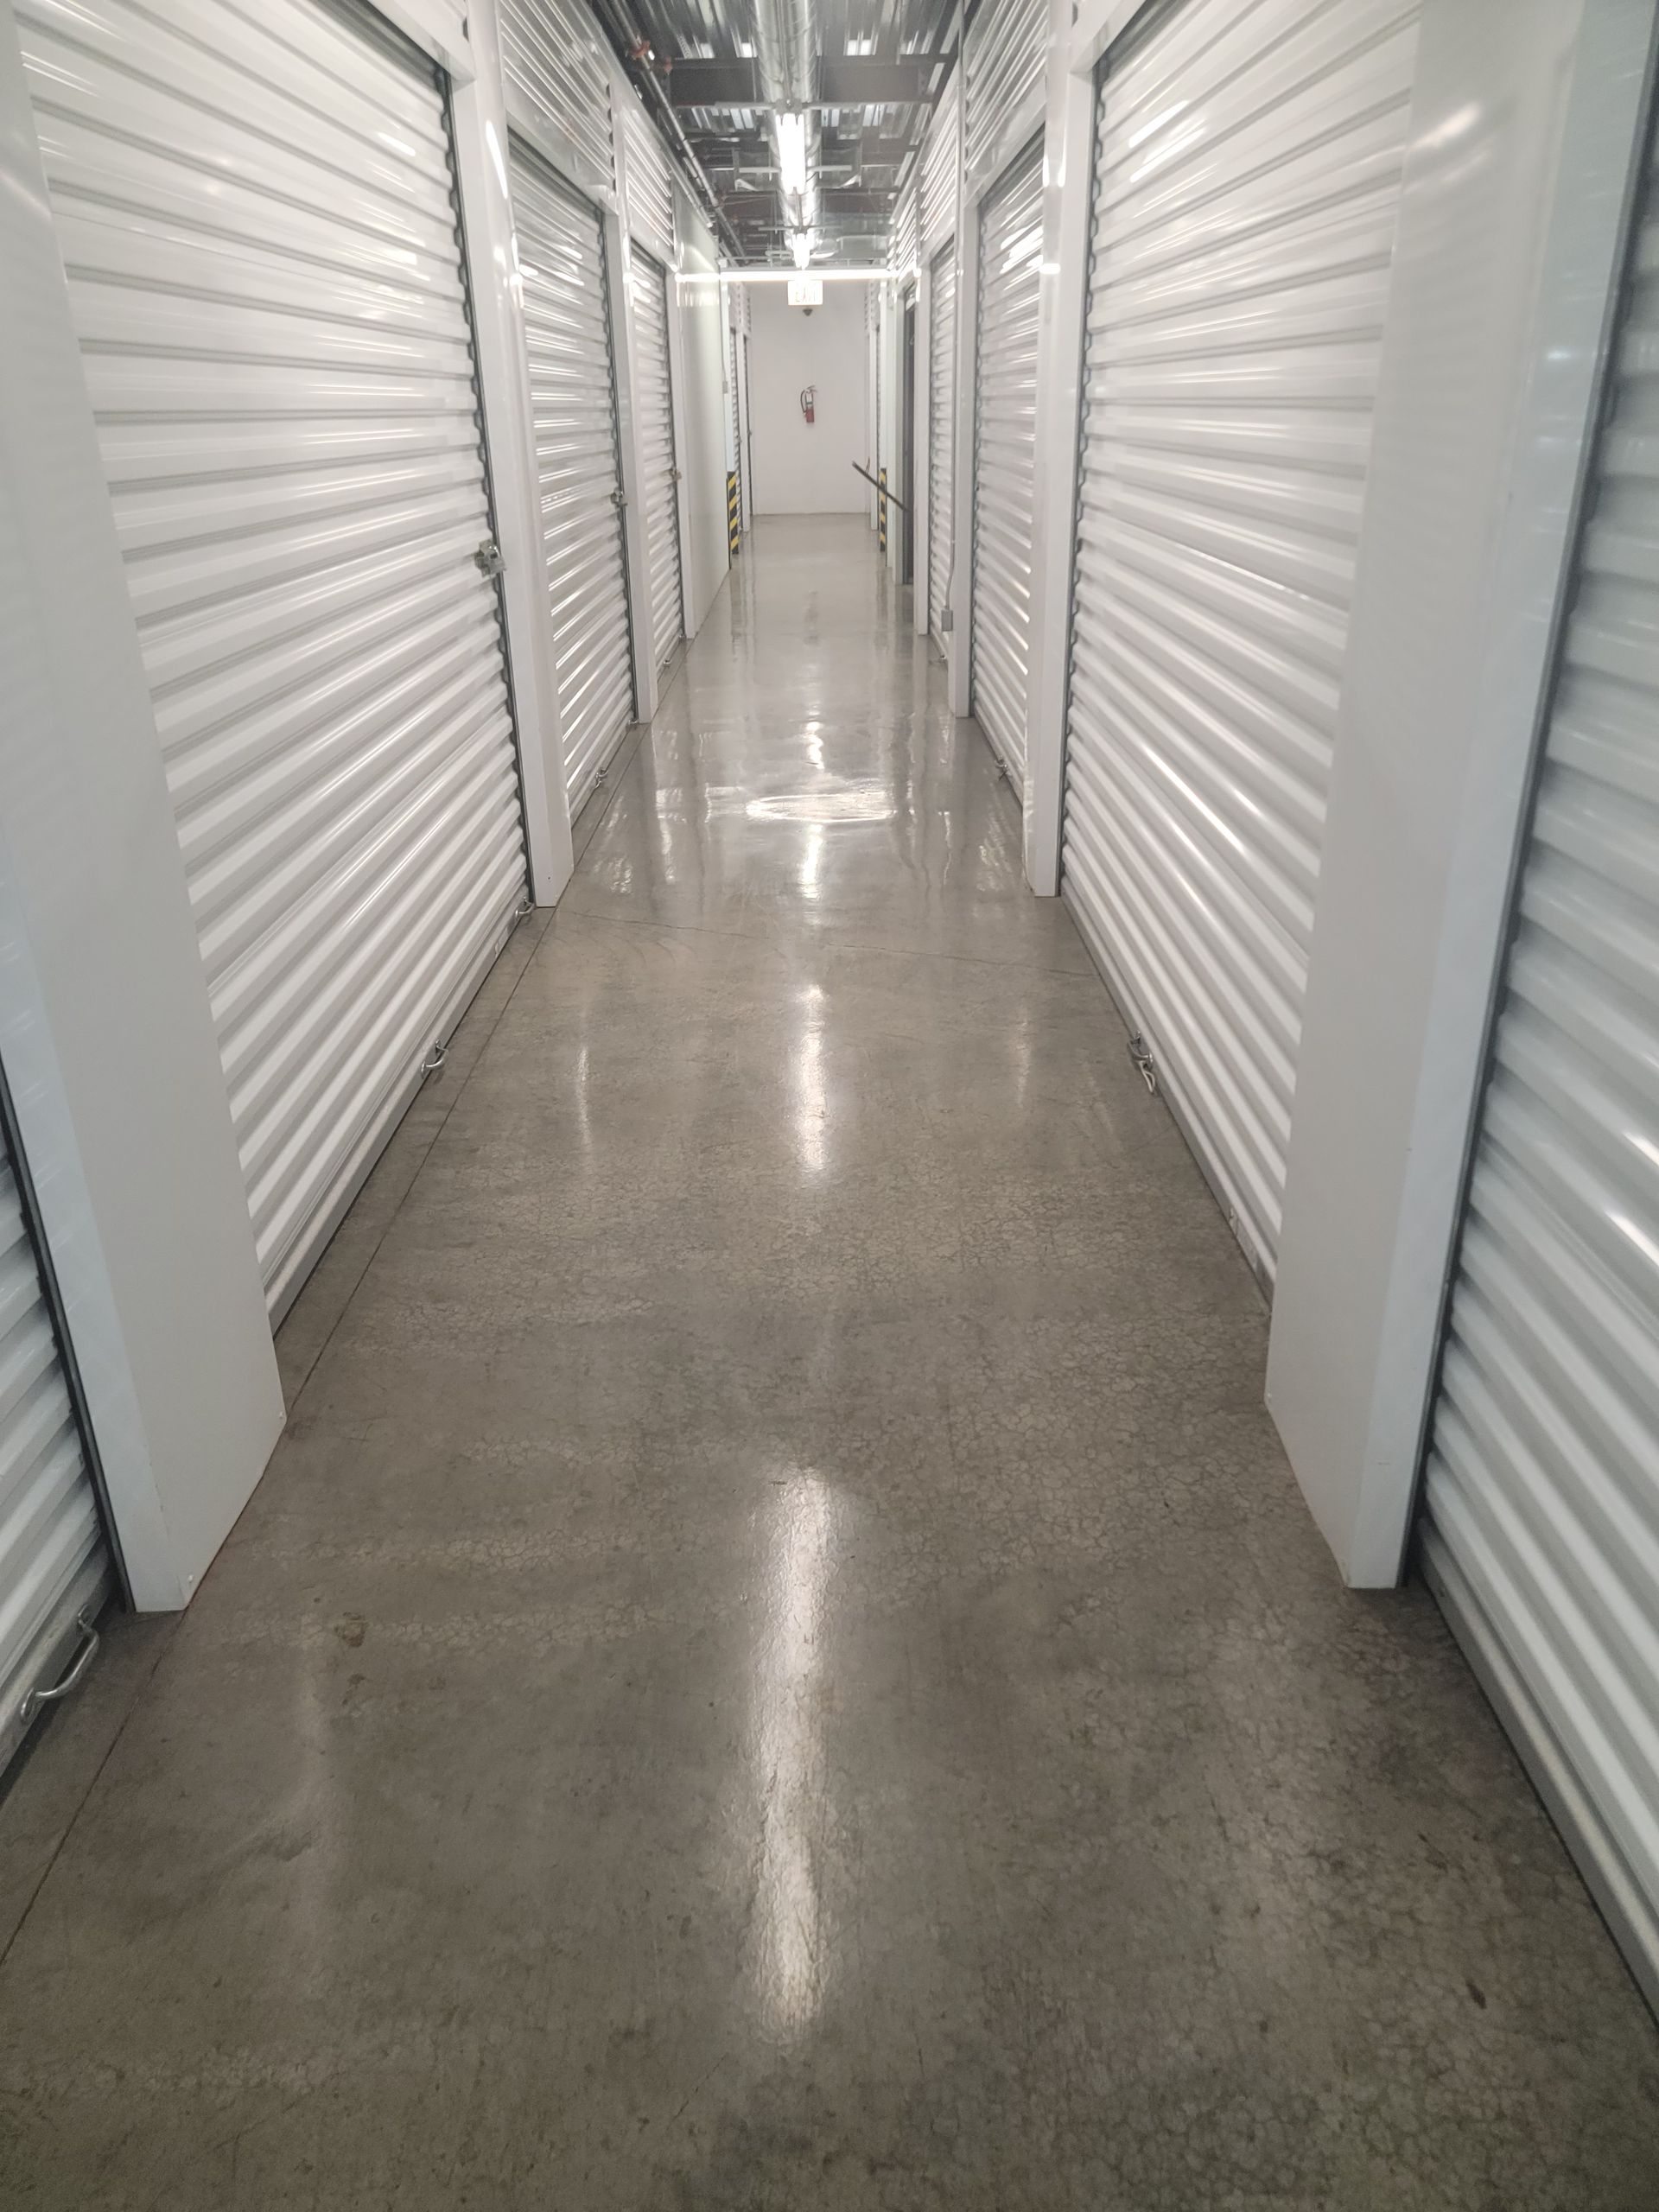 A long hallway with a lot of white walls and doors.